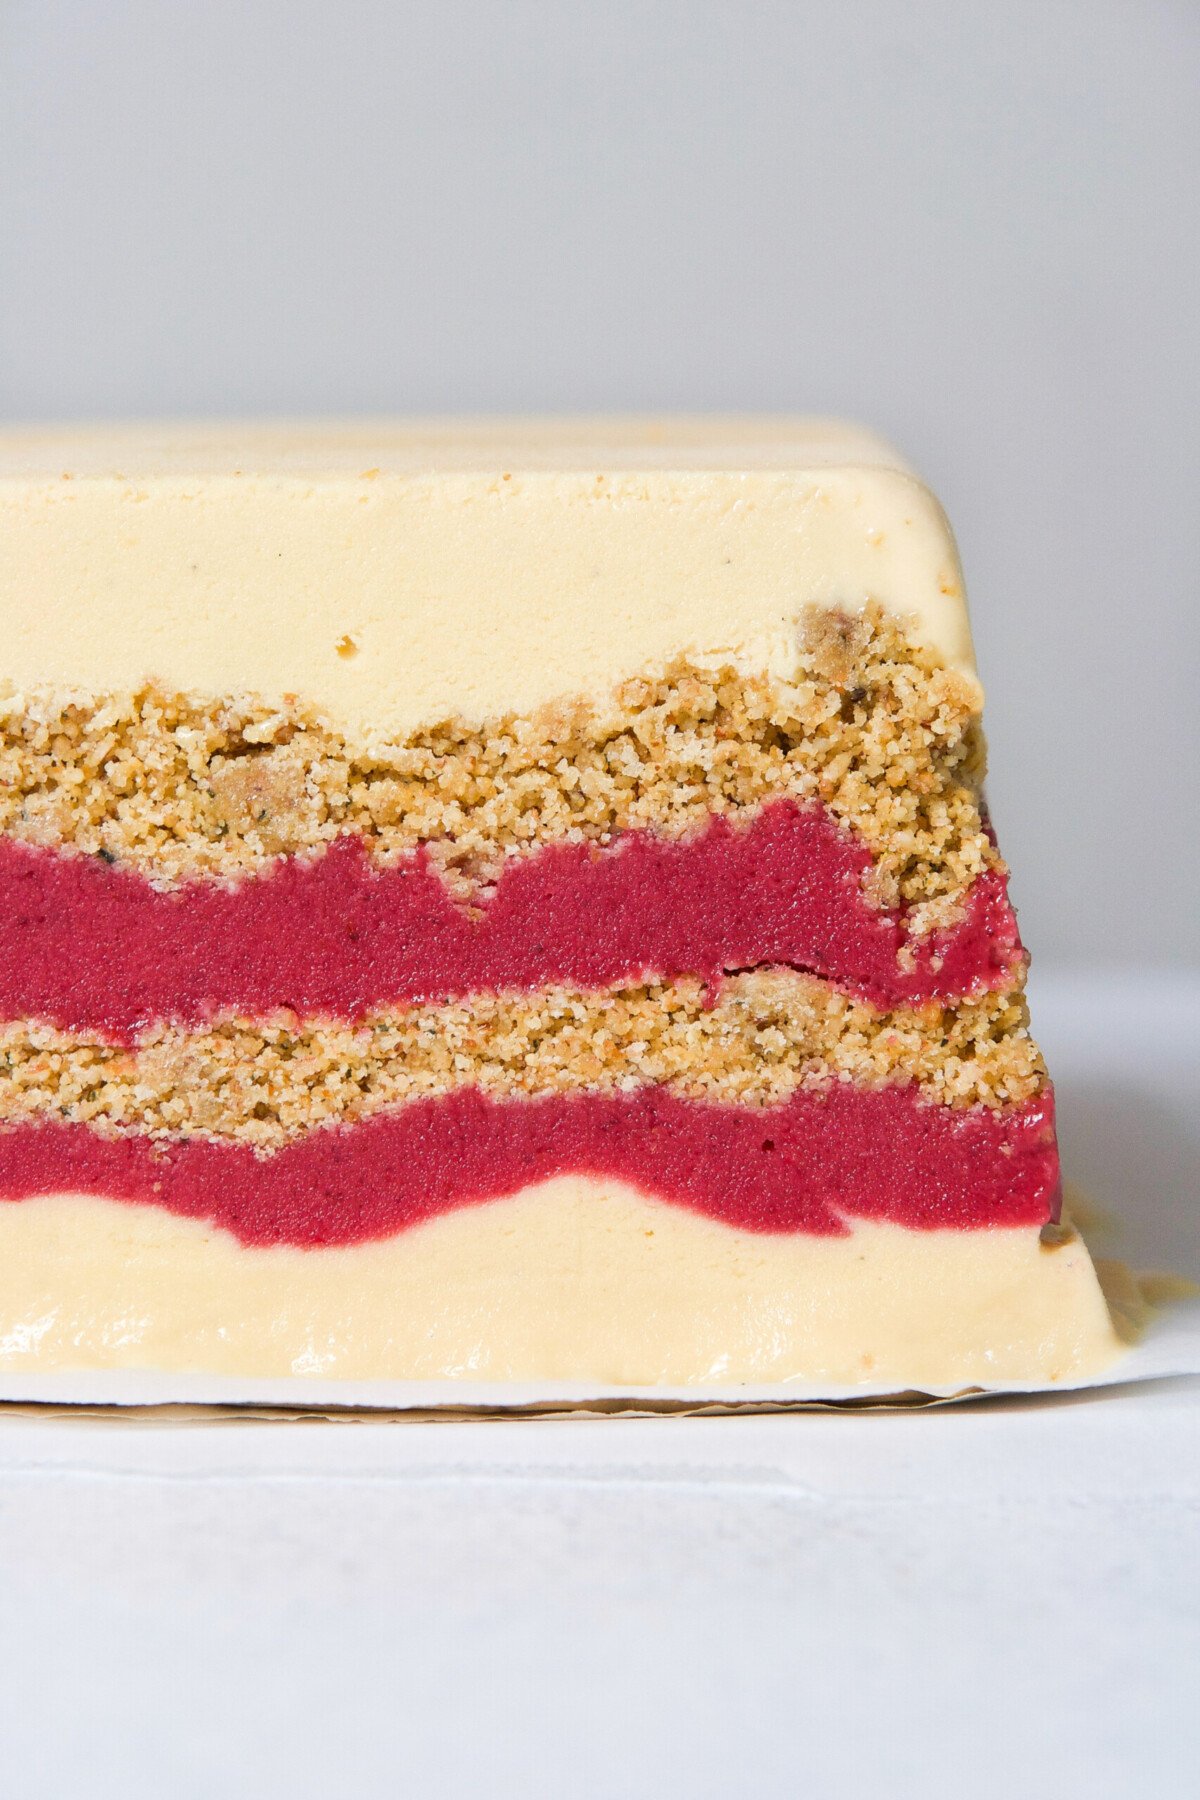 A wonderfully festive, and easy-to-make dessert, this layered ice cream cake featuring creamy goat milk ice cream, naturally sweetened cranberry curd, and a nutty biscotti layer, is most definitely one for the books. | from Lauren Grant of Zestful Kitchen